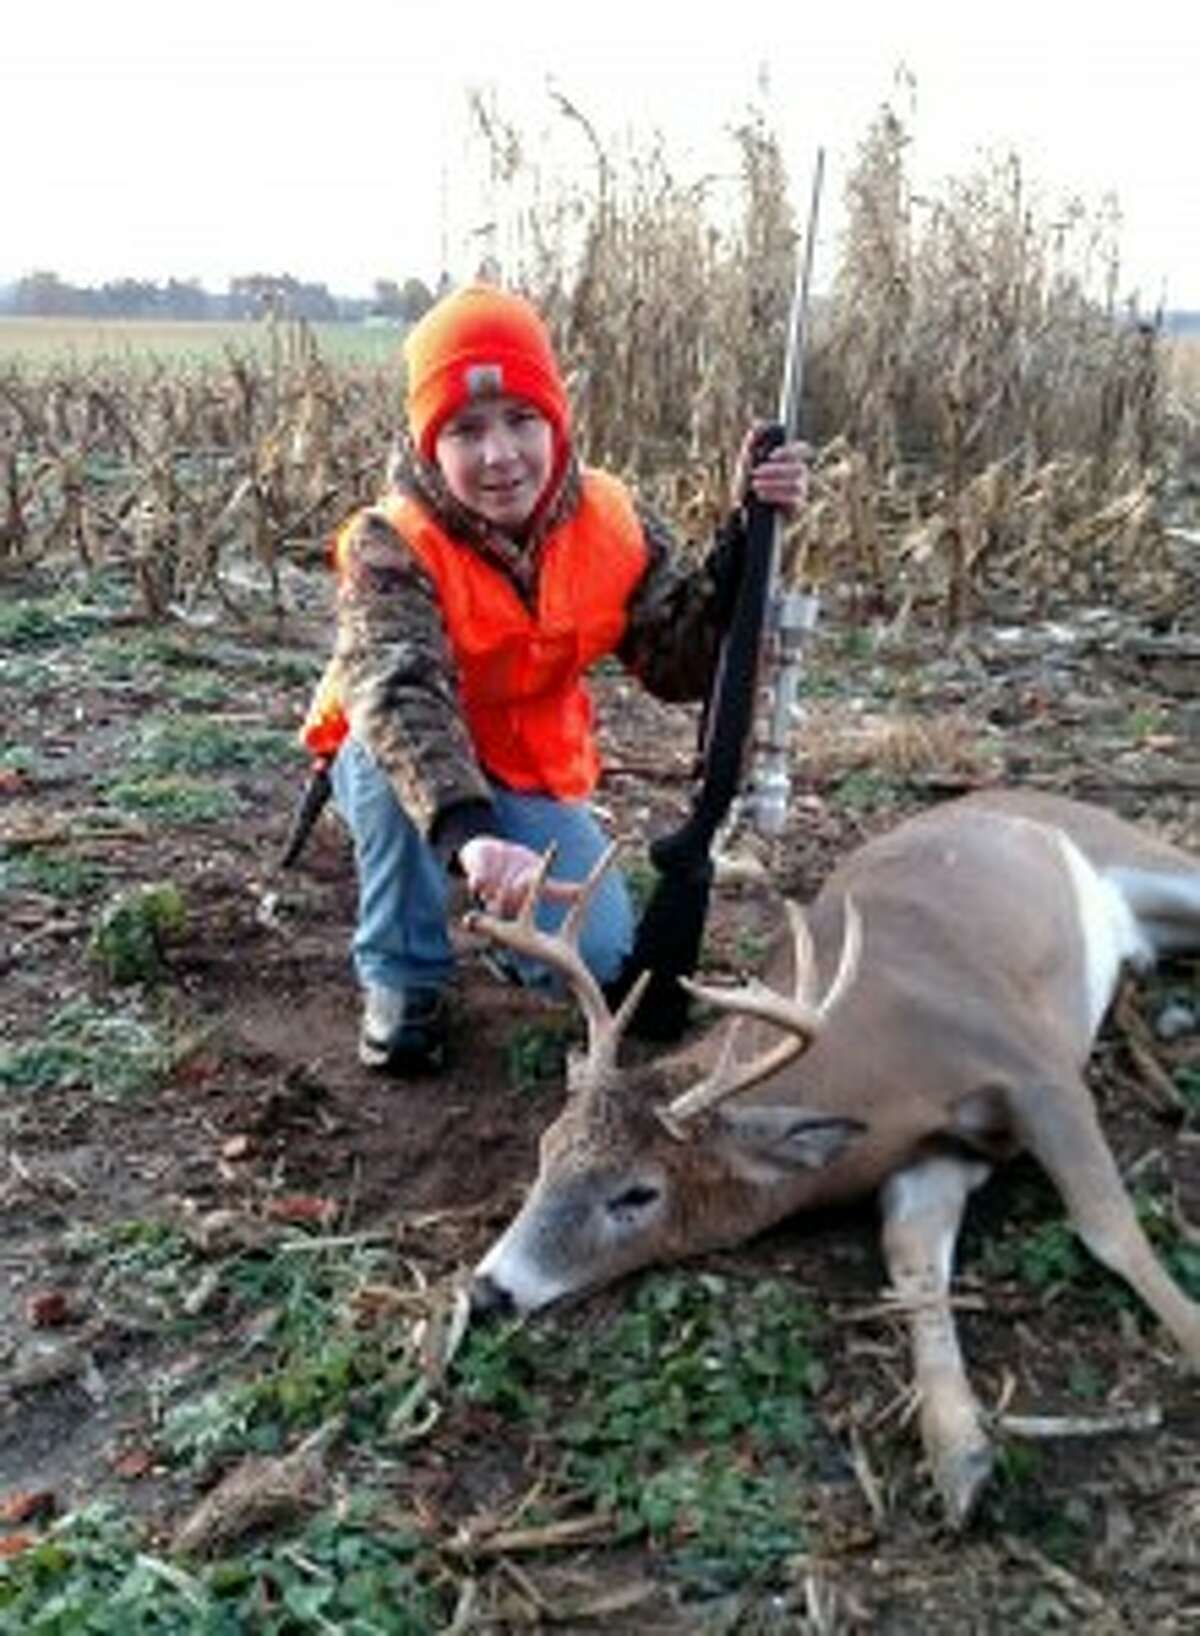 REED CITY — Another deer season has ended, but successful hunters will have fond memories for quite some time. That includes Scott Harris, 41, of Reed City, who was a successful hunter way back on opening day, Nov. 15.Harris shot an 8-point buck with his .270 Ruger. He didn’t realize ahead of time this particular buck was out there.“Me and some friends who had been watching the property knew there were some nice ones out there,” he said. “A friend of mine sitting on neighboring property to the east of me, I heard him shoot three times until I was paying attention in that direction. I saw some does walking across an edge of a hayfield behind a cornstrip and I was scoping that way. My son was watching with binoculars. He saw some does.”Then the buck appeared.“We were looking through some standing corn and couldn’t tell,” Harris said. “He finally stepped out, looked at us and turned his head. We knew it was a decent one. I took the shot and he dropped in his tracks.”Harris said his shot was from about 250 yards. He hit the deer right behind the shoulder.“That’s probably the best buck I’ve ever shot,” he said. “I think with the law changing here a little bit with the public shooting the larger deer, it’s helping the quality of the deer if people are passing on the little spike and four-pointers. This deer wasn’t overly huge, body wise, but he has a nice rack.“My buddy, he shot one with a bow that was a 10-point probably a mile and a half from there, but his body mass was just unbelievable. That 10-pointer we had never seen. But with the deer management and restrictions on the antlers, that’s helping the quality of the deer.”